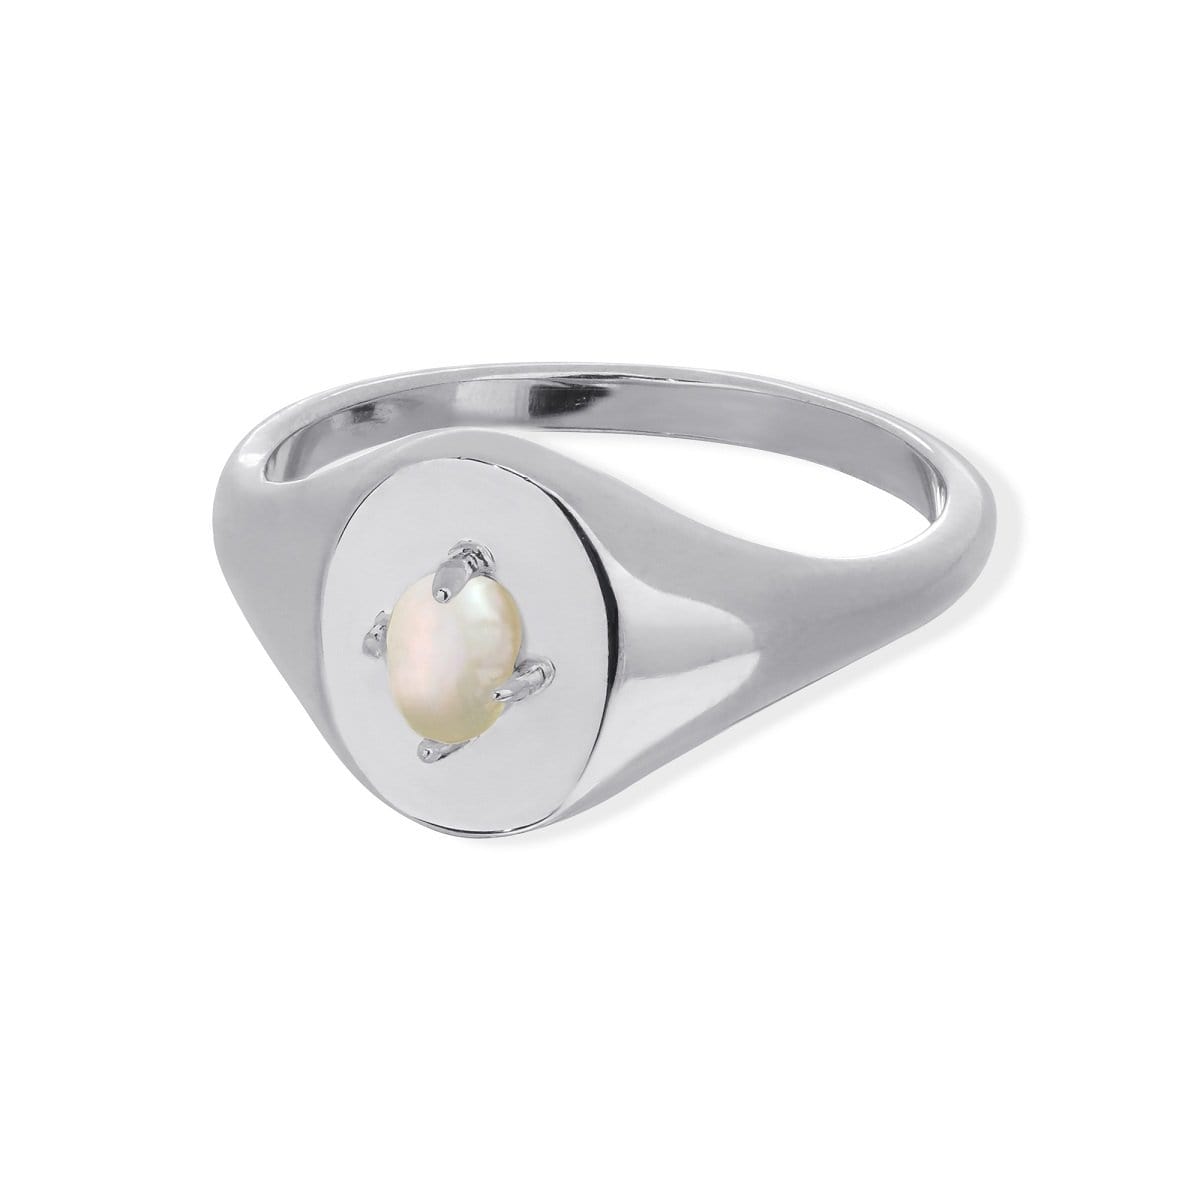 Boma Jewelry Rings Sterling Silver / 7 Parel Signet Ring